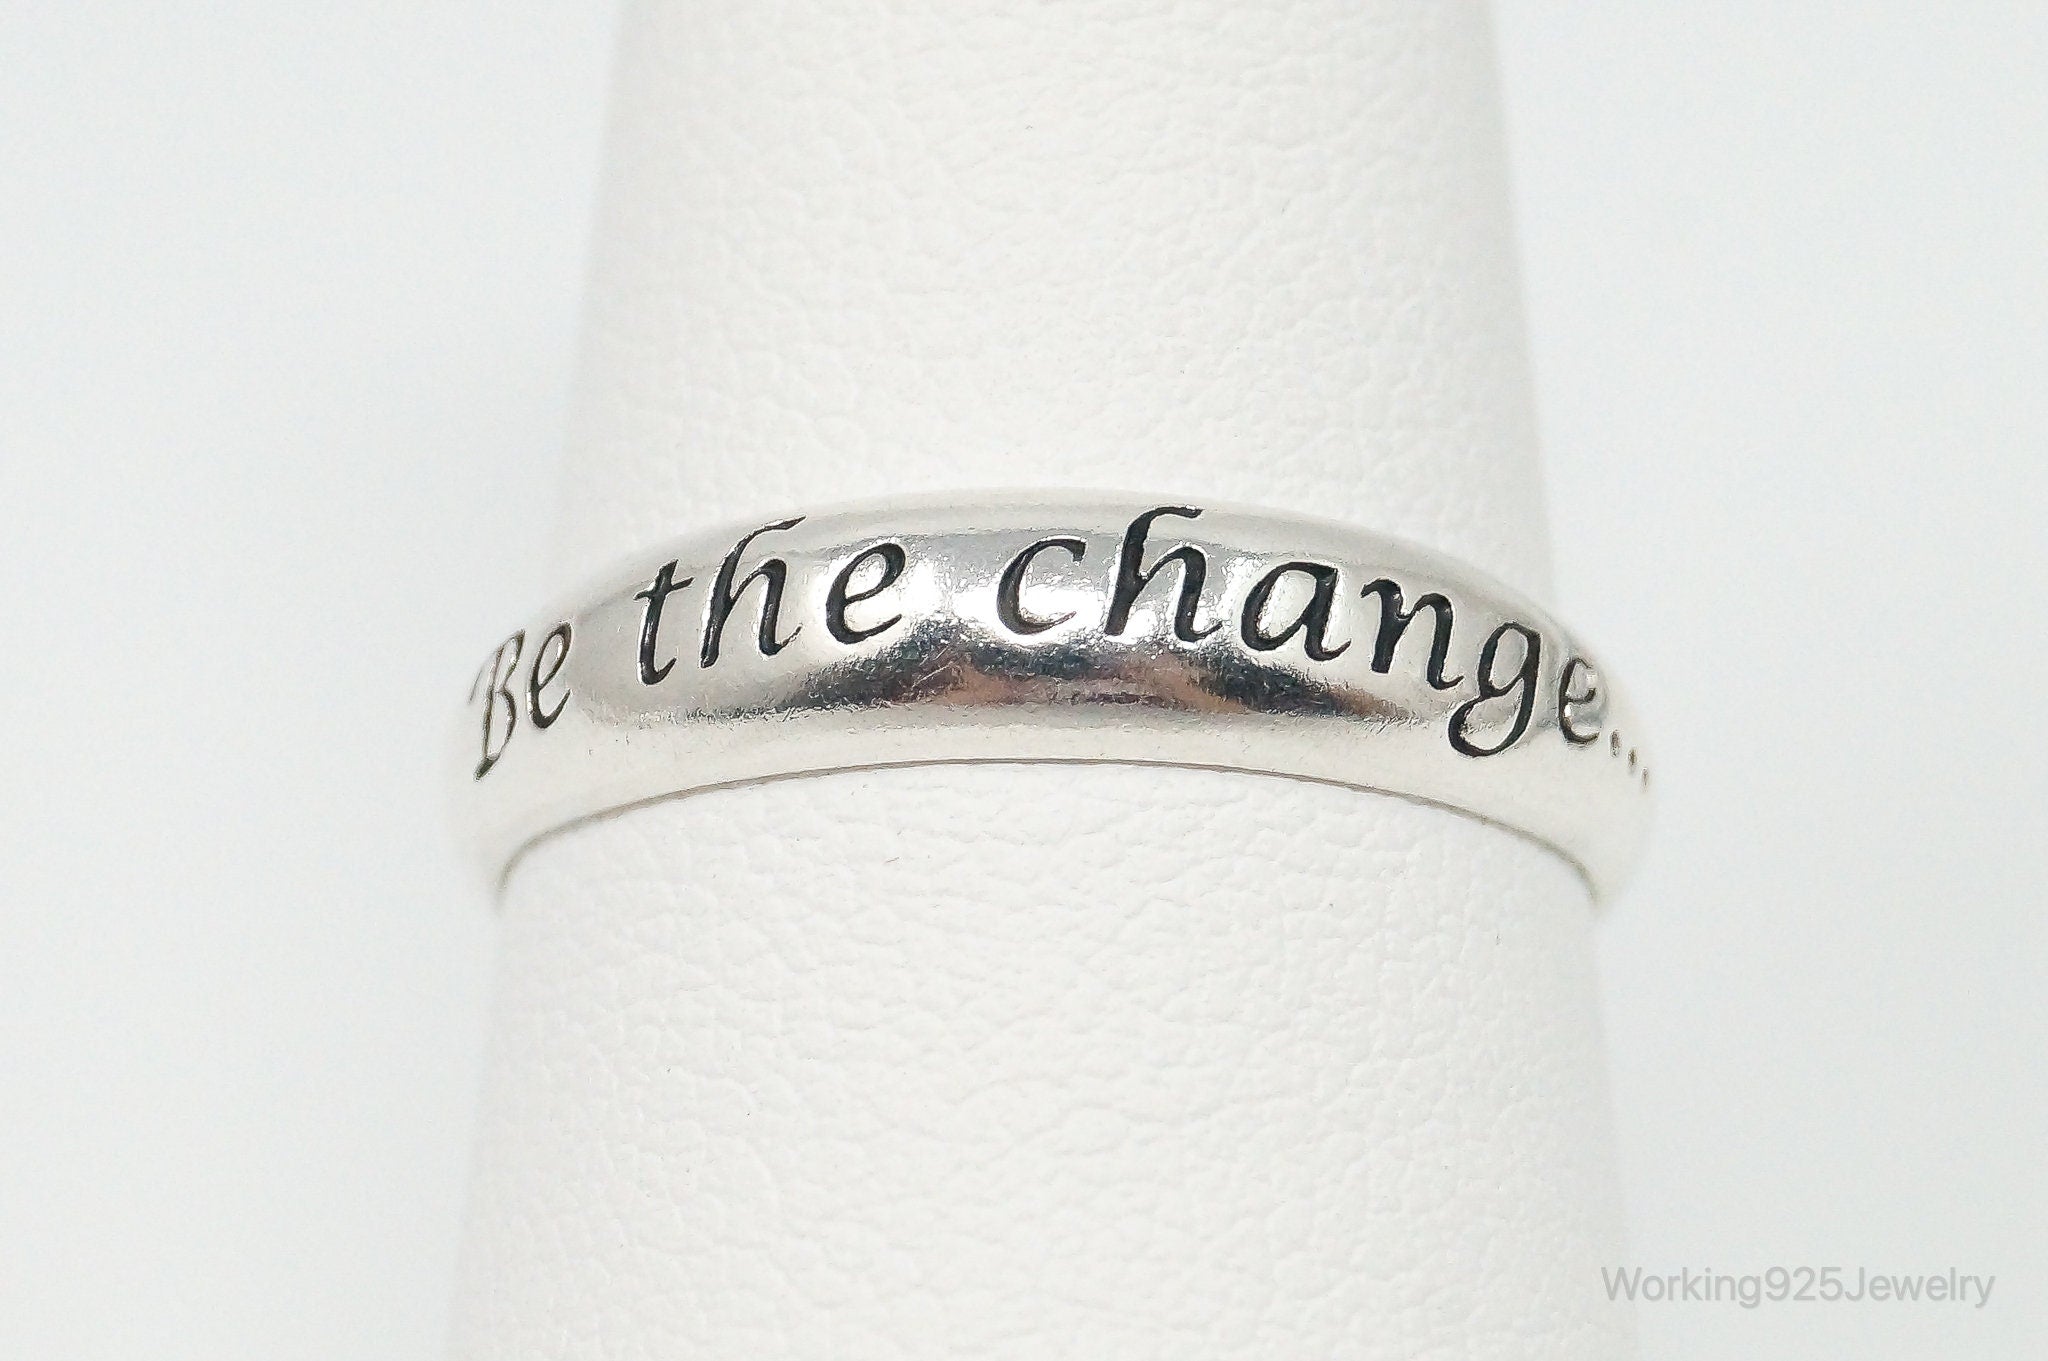 Designer RJ "Be The Change" Sterling Silver Quote Ring - Size 8